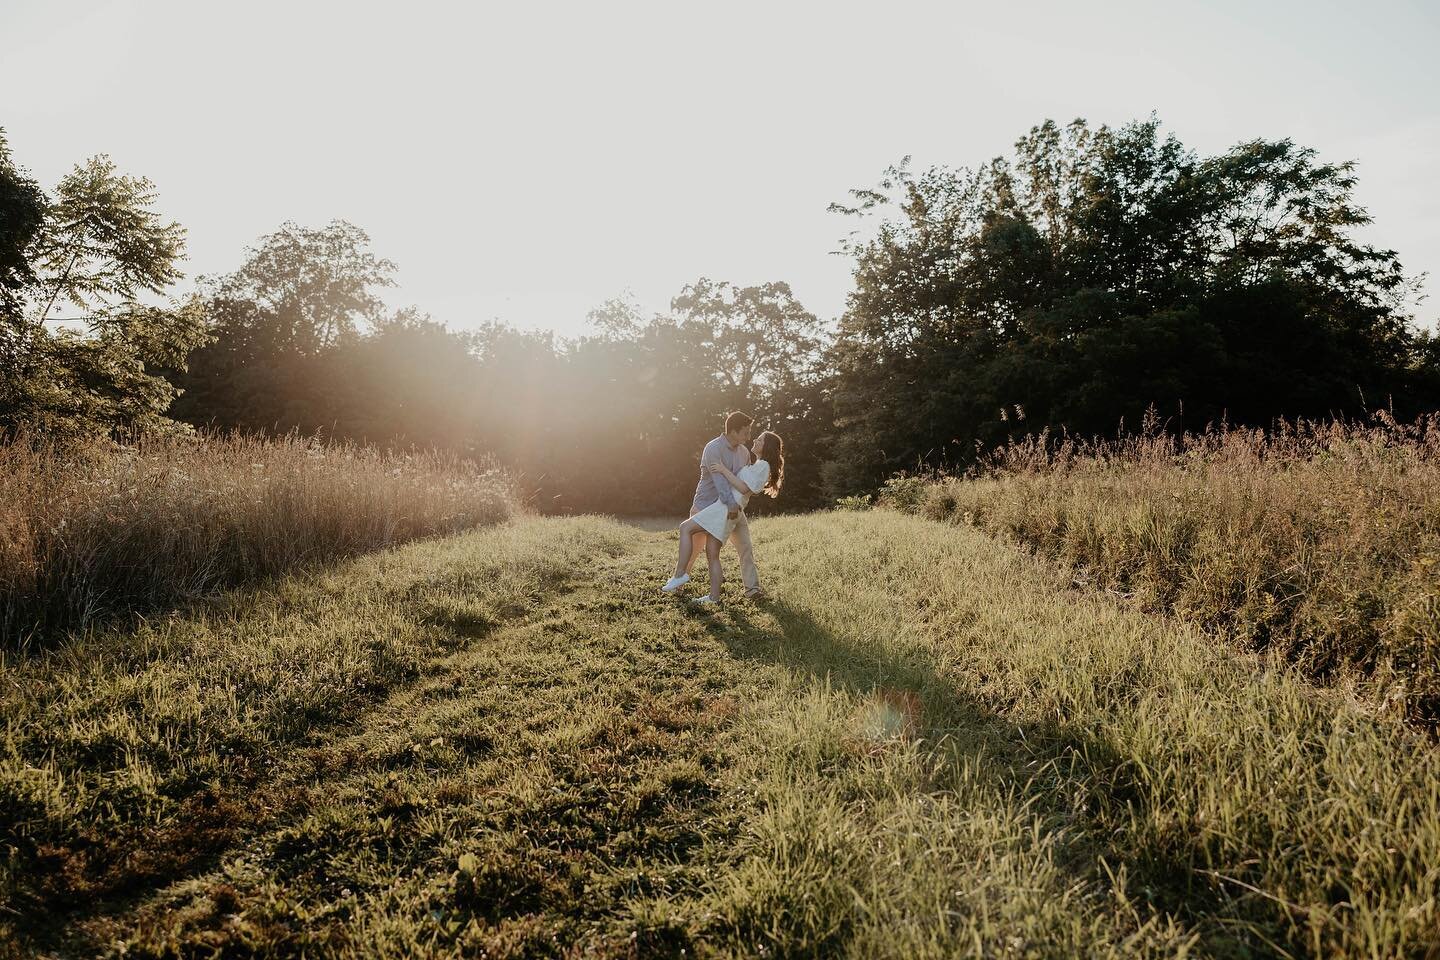 This past Friday certainly felt like a pressure cooker outside here in NY. Yet, it couldn&rsquo;t stop this magical engagement session. The cool breeze rustling through the wild flowers, while both the sun rays hit, and the moon peaked out, was an ad